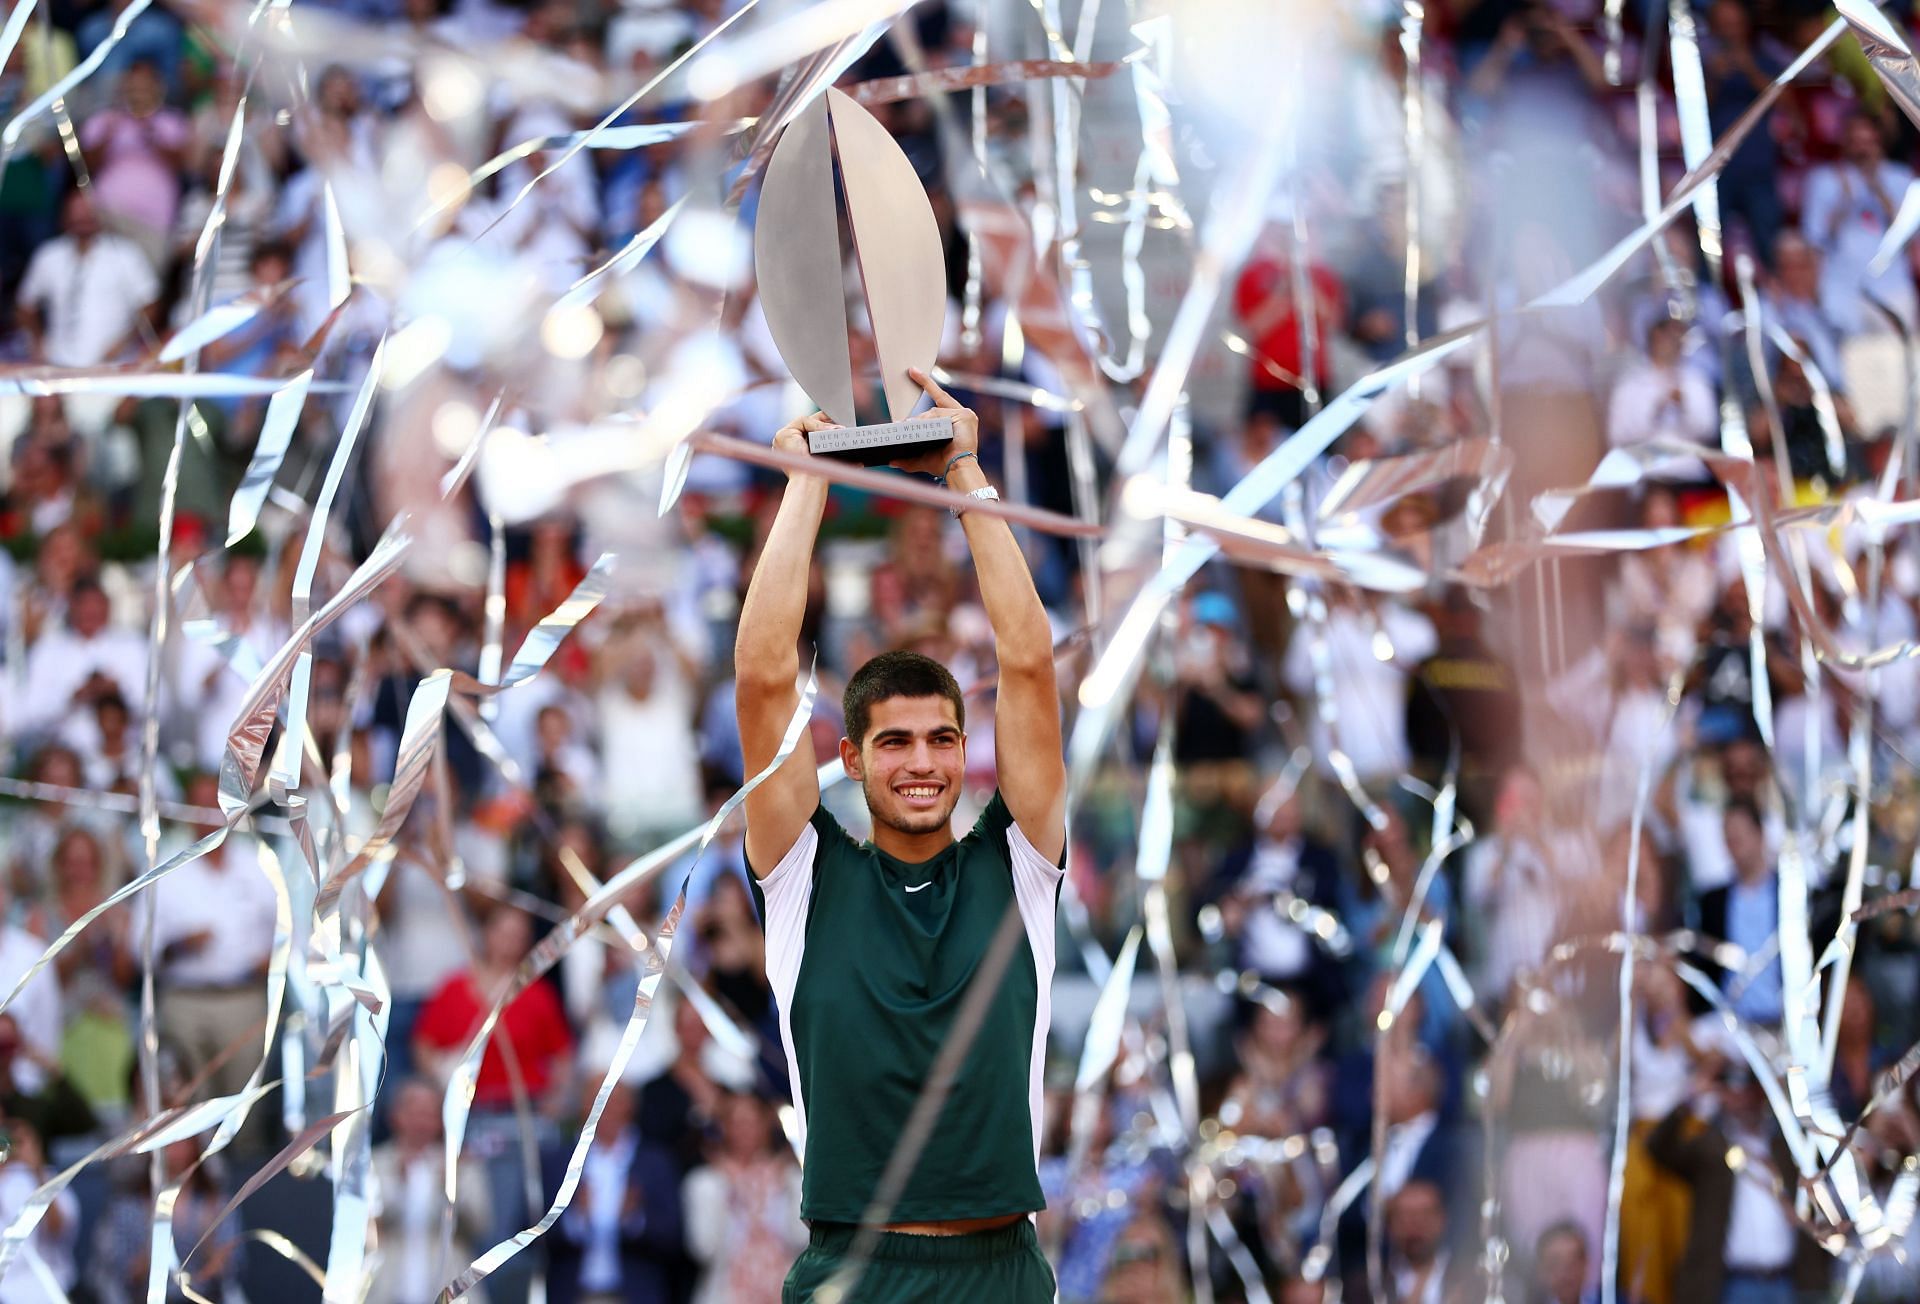 Alcaraz lifts the trophy at the Mutua Madrid Open - Day 11